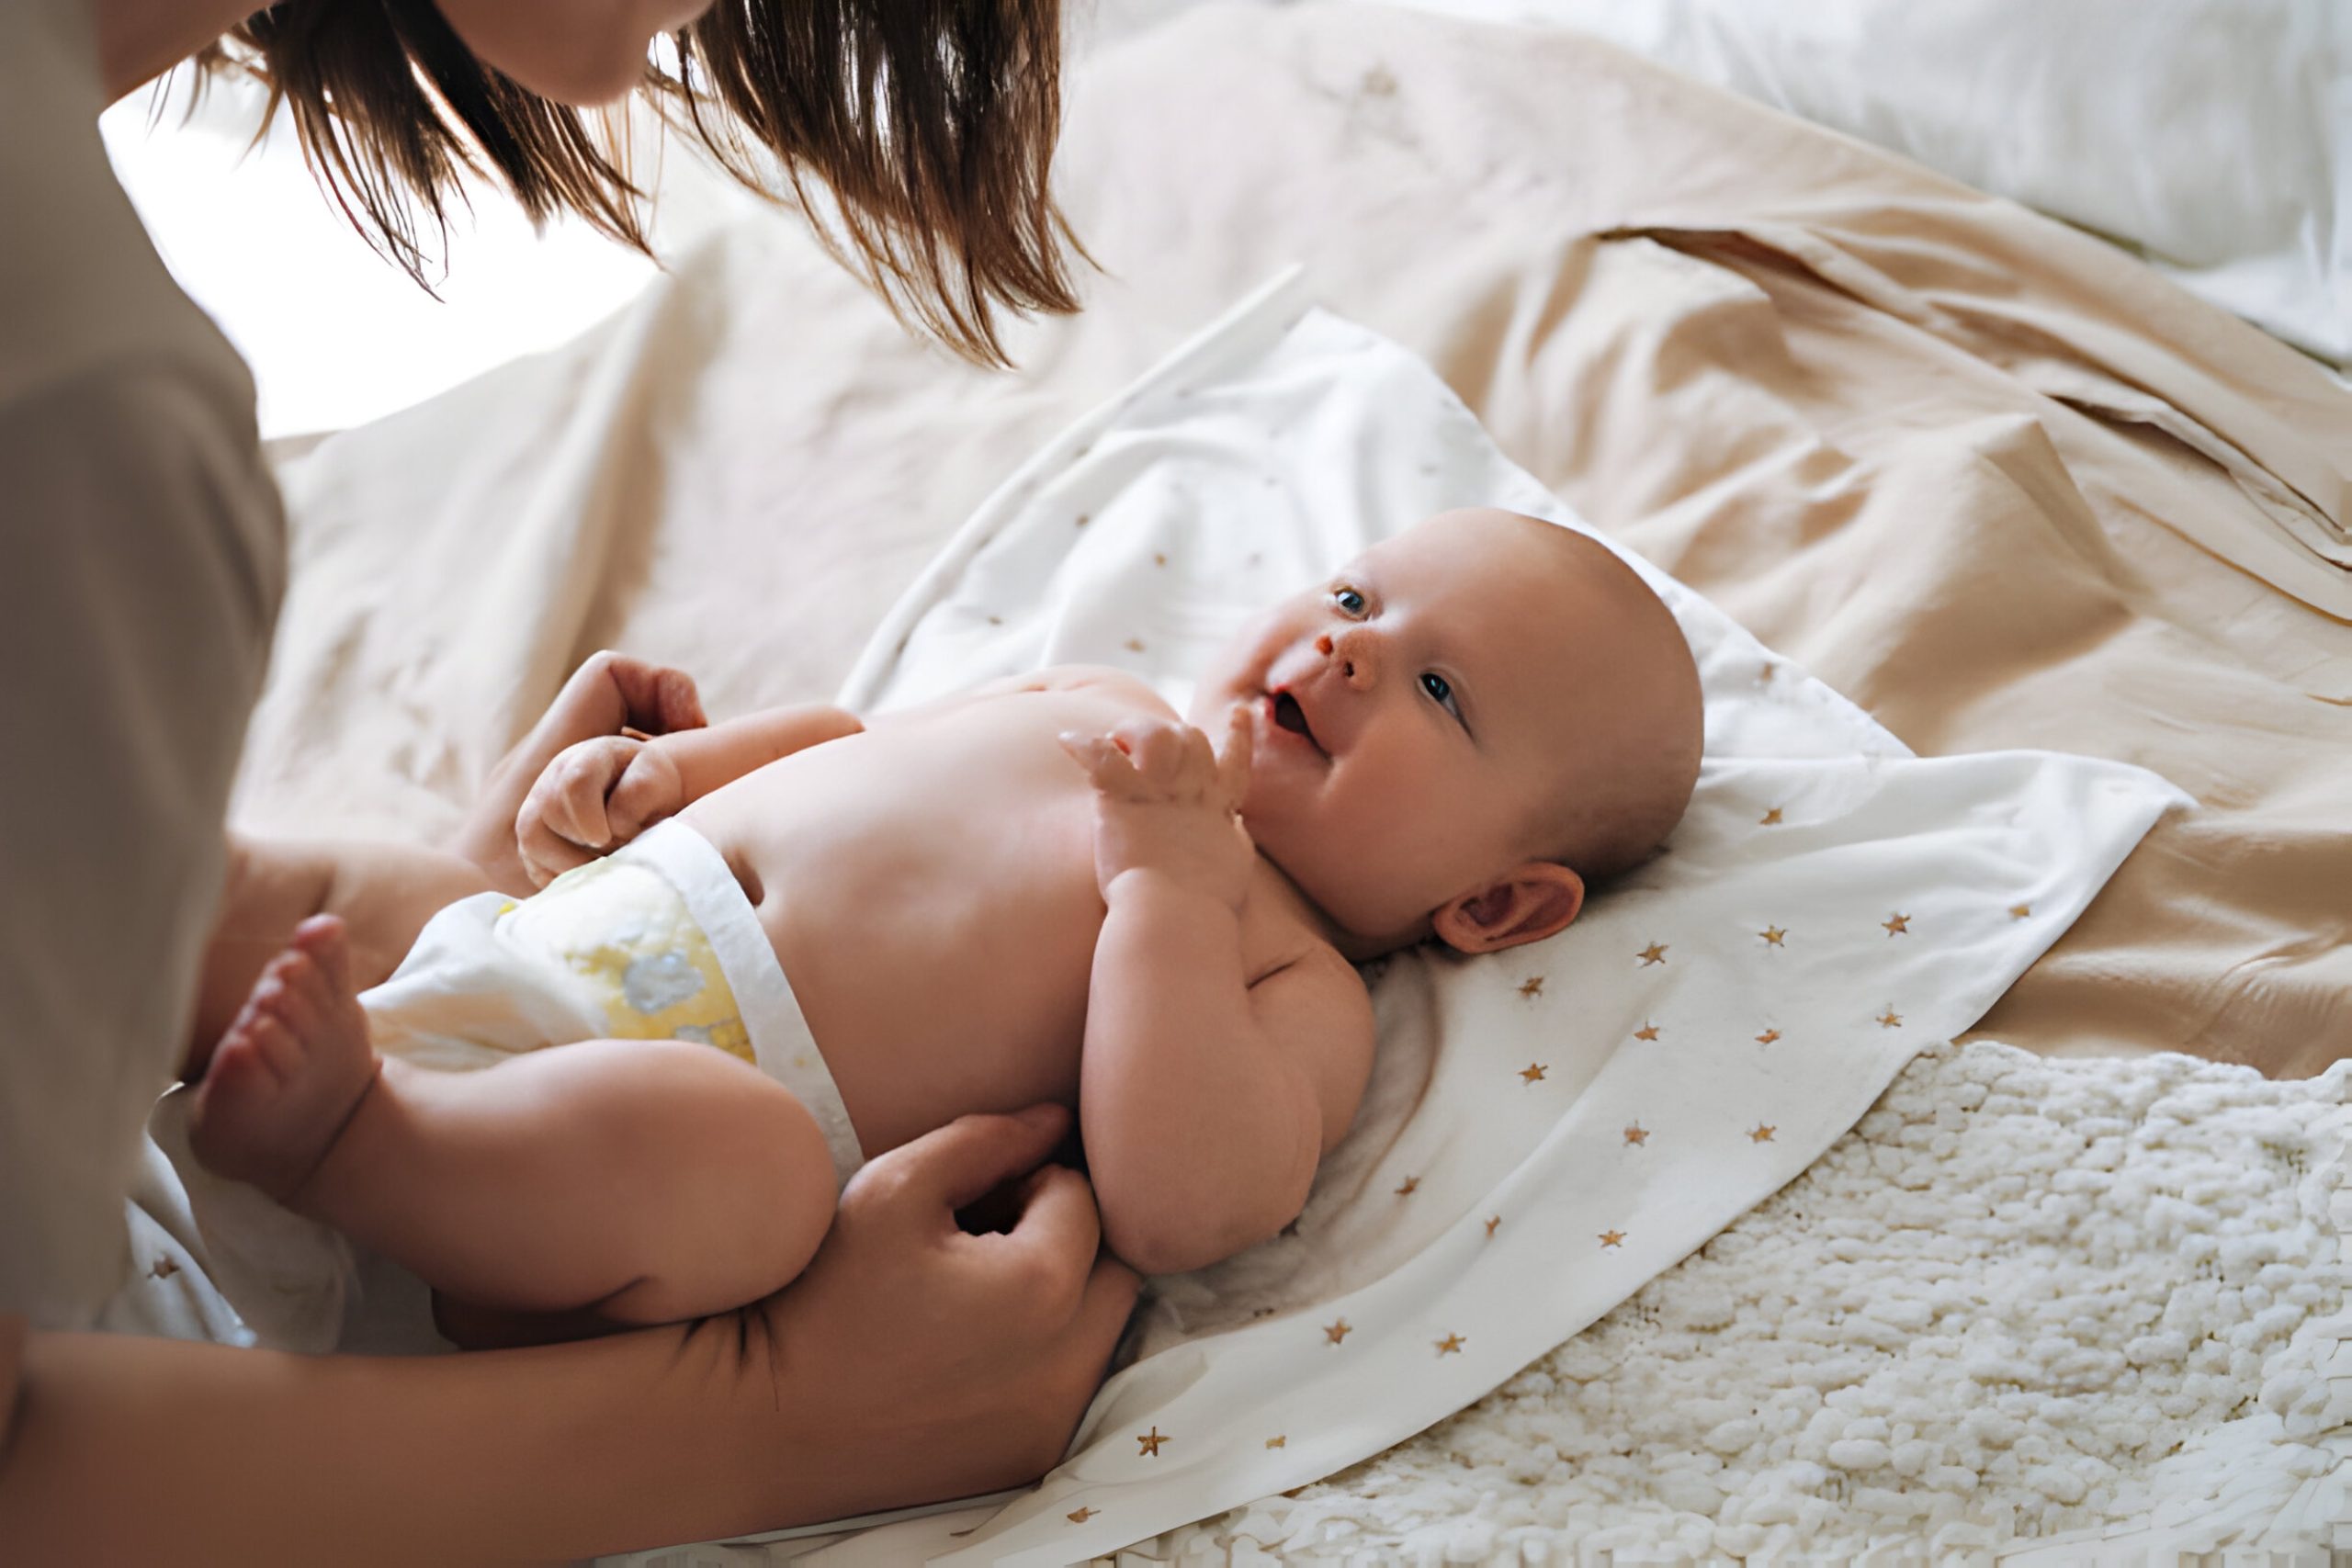 Expert Tips for Newborn Care from a Pediatrician